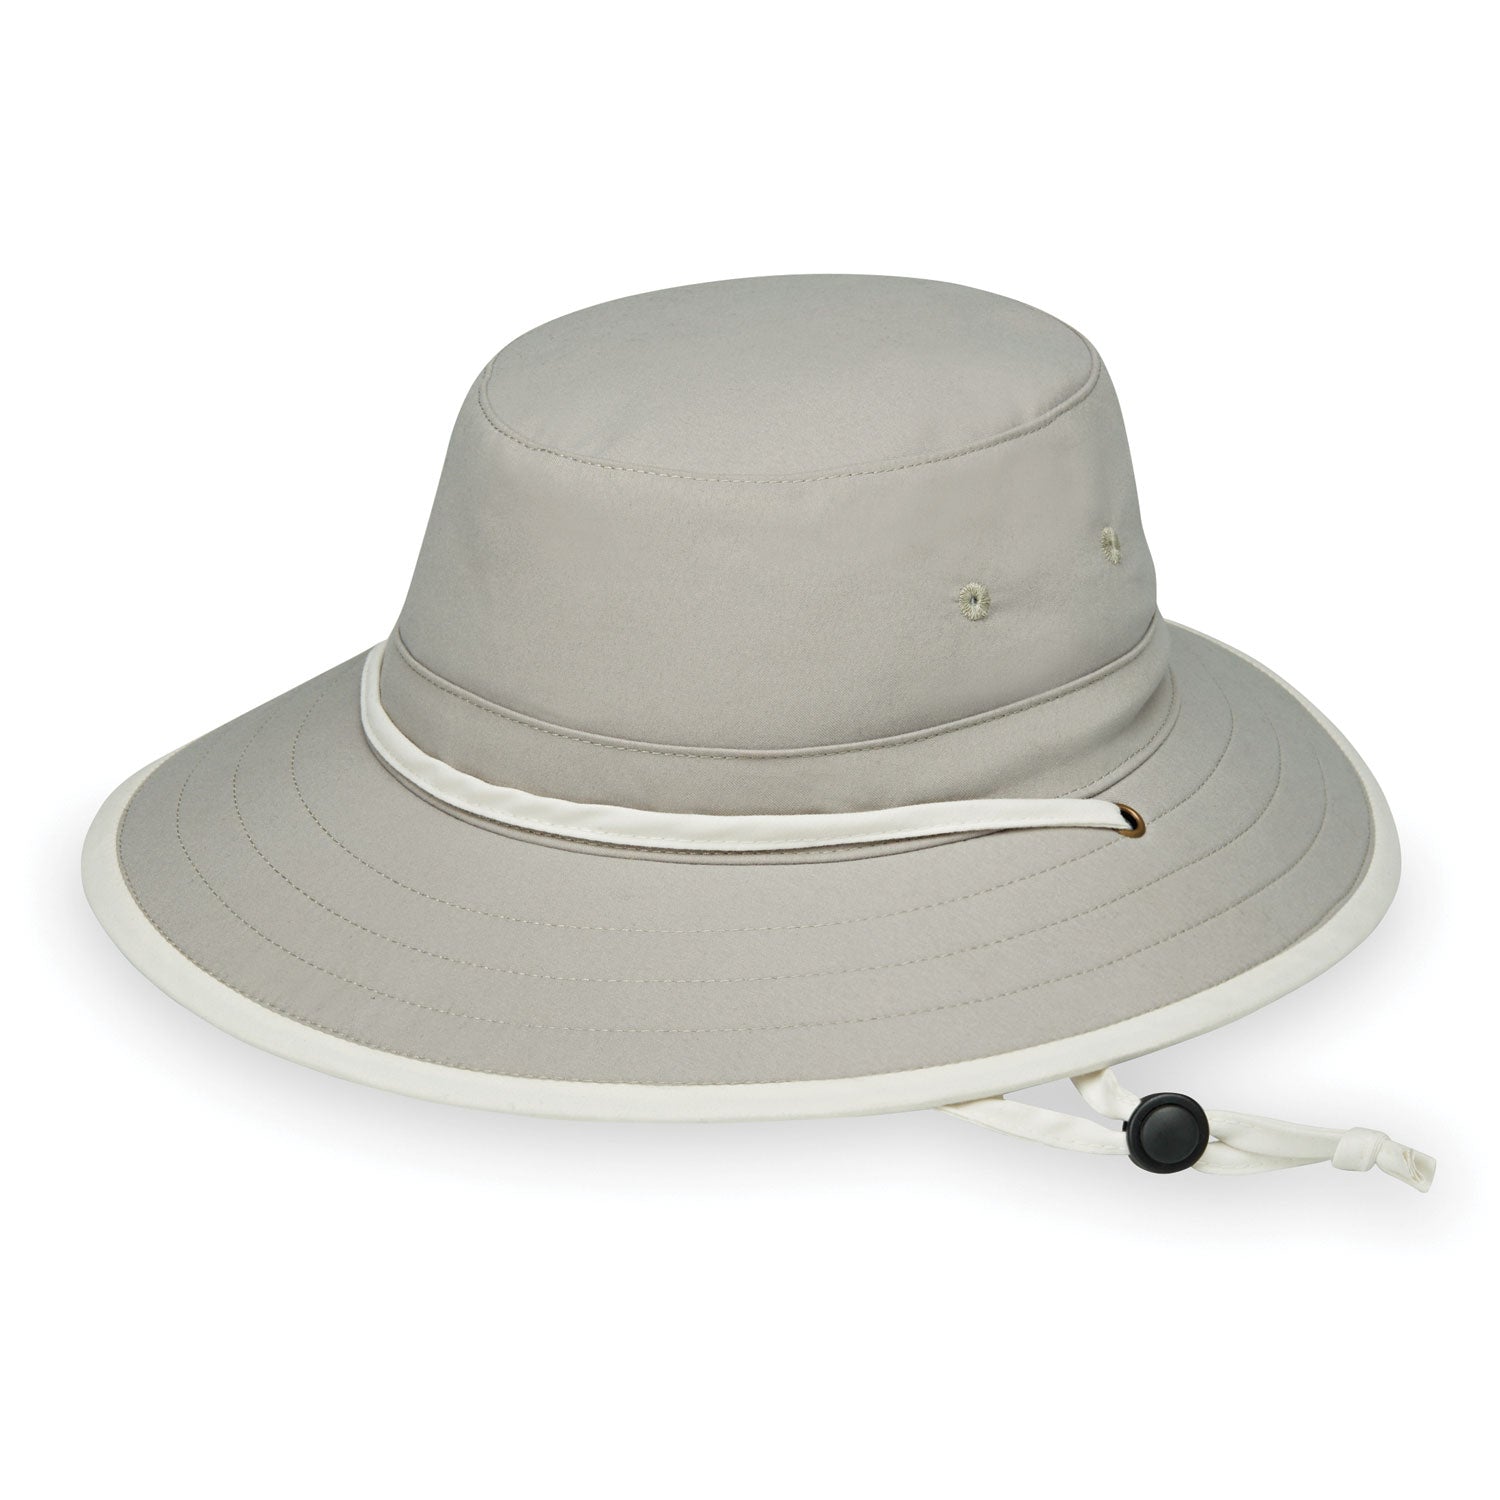 Featuring Women's Packable UPF Ladies' Explorer Sun Hat with Chinstrap in Stone Natural from Wallaroo